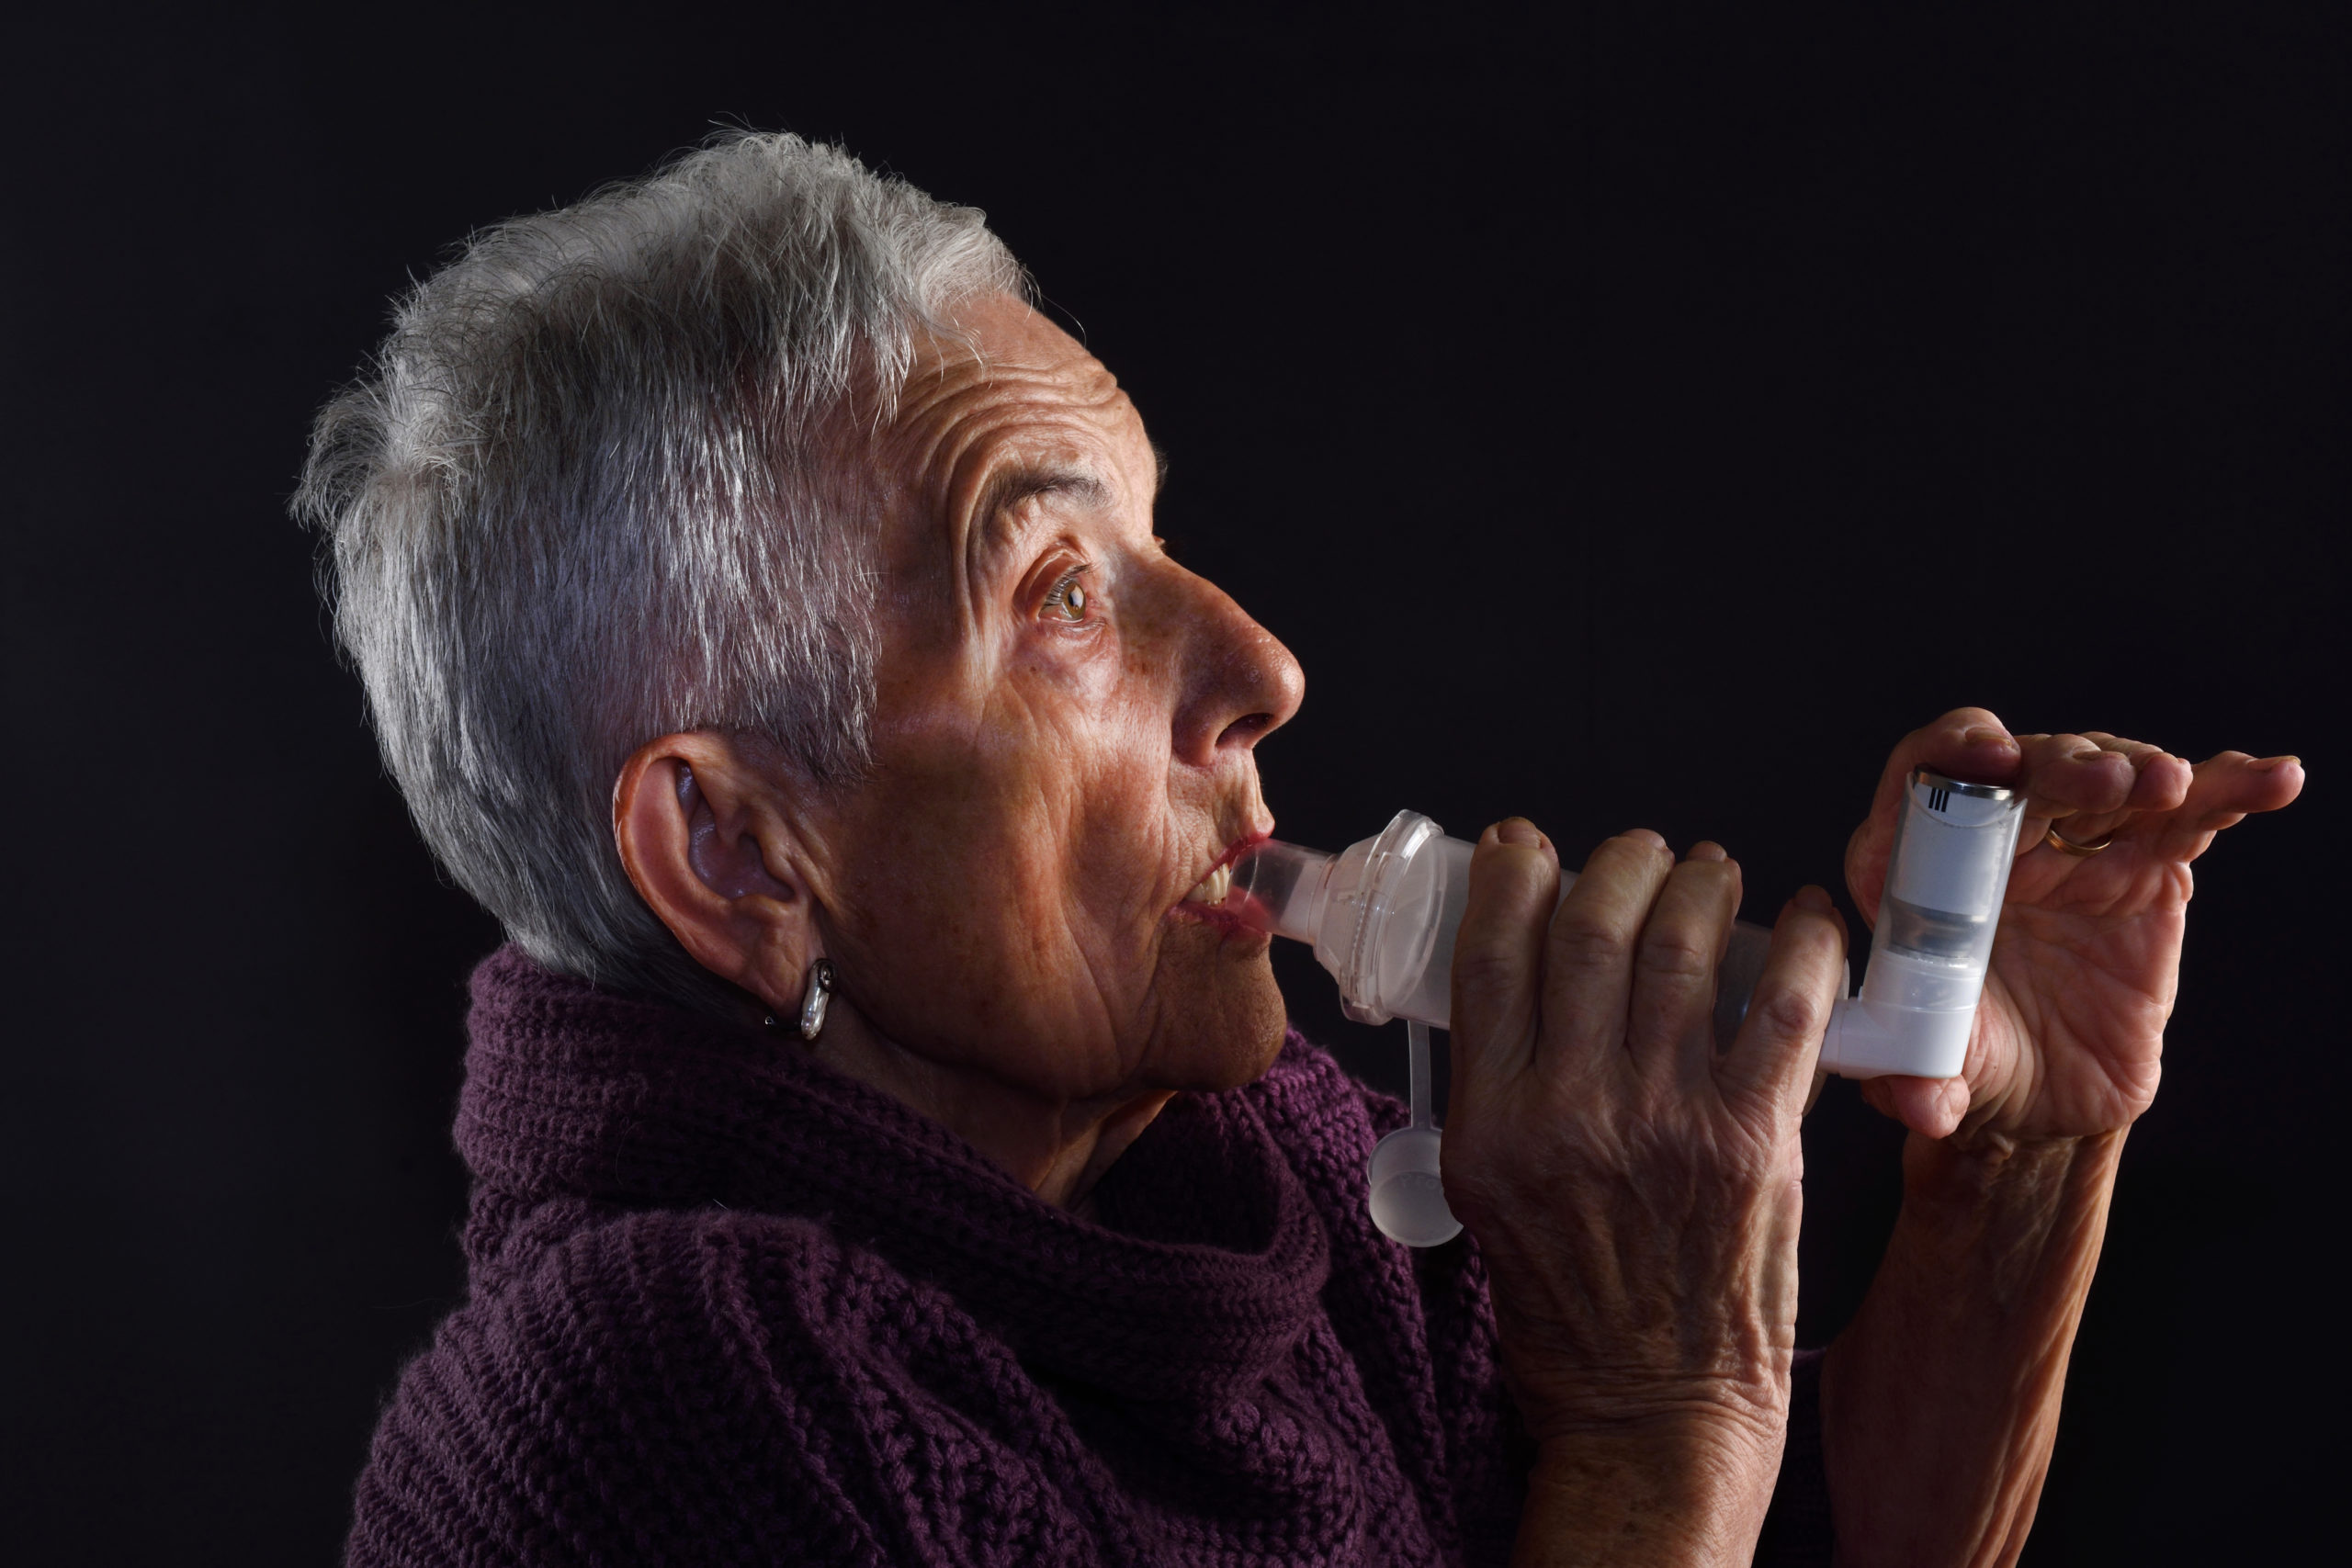 A woman with short grey hair and purple jumper using an asthma inhaler and spacer